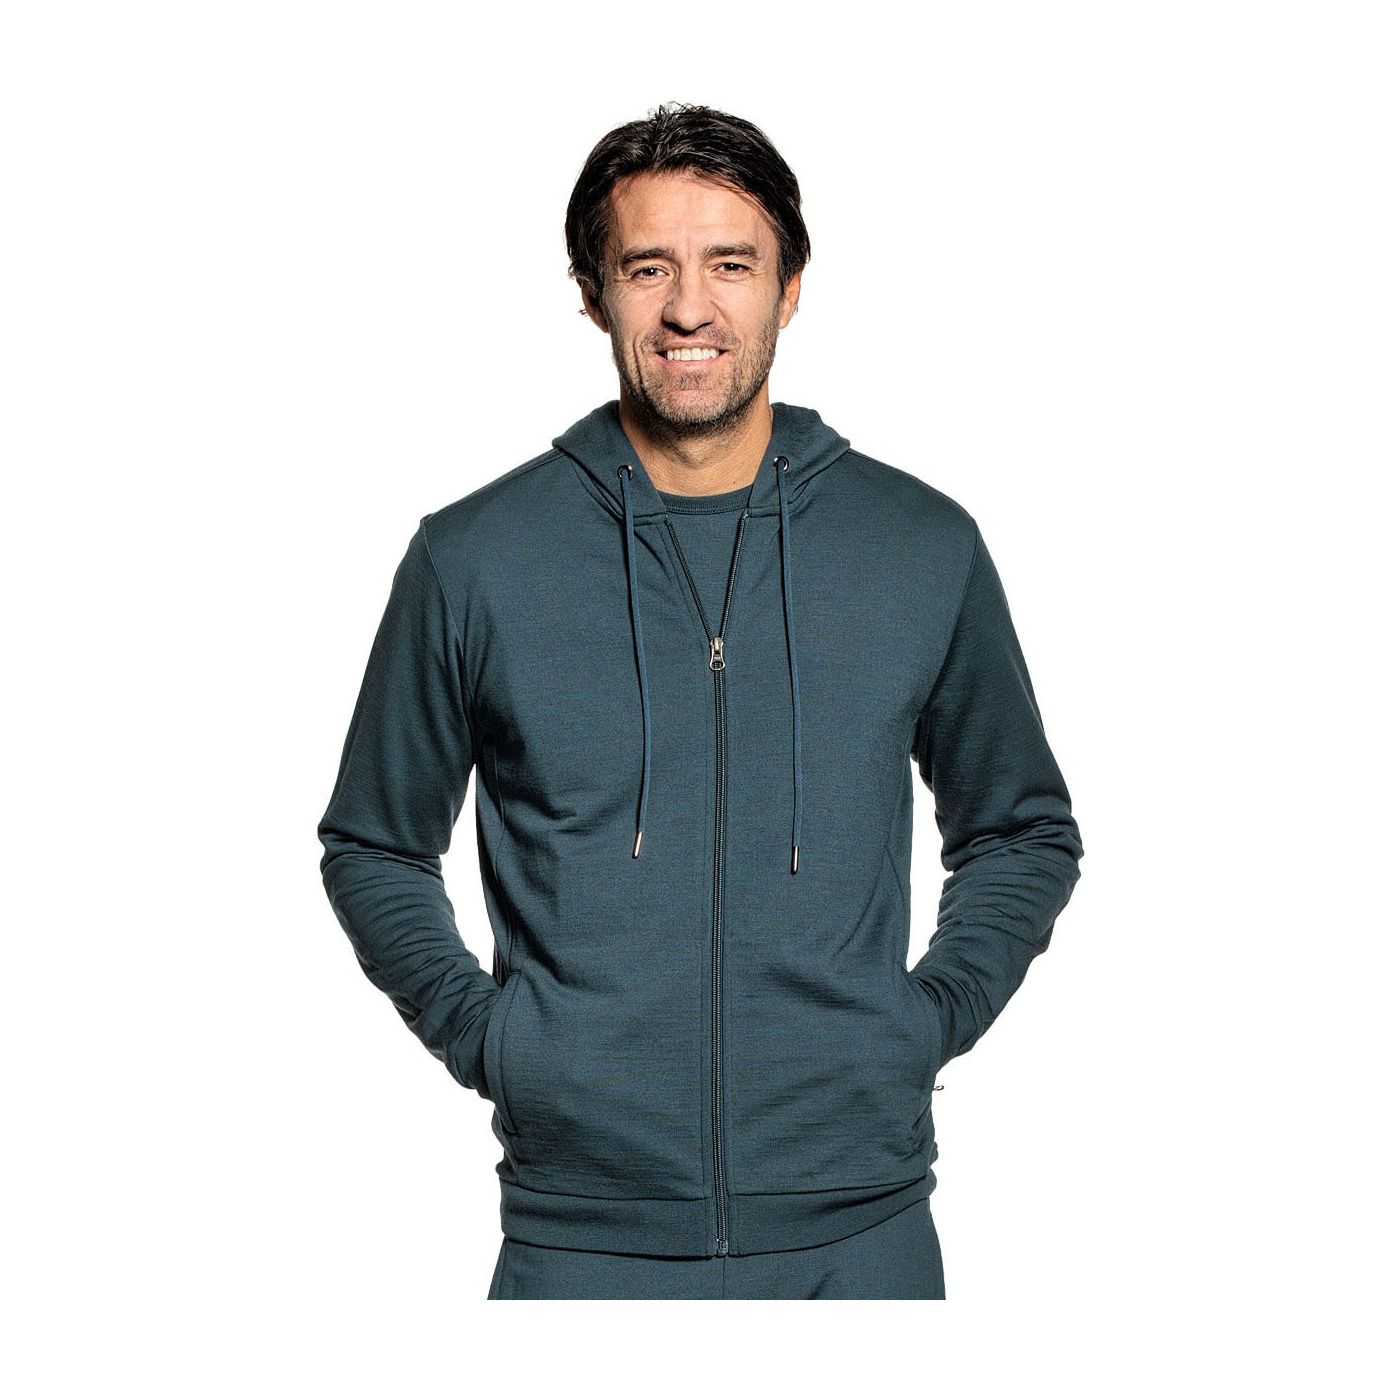 Hoodie with zipper for men made of Merino wool in Blue green